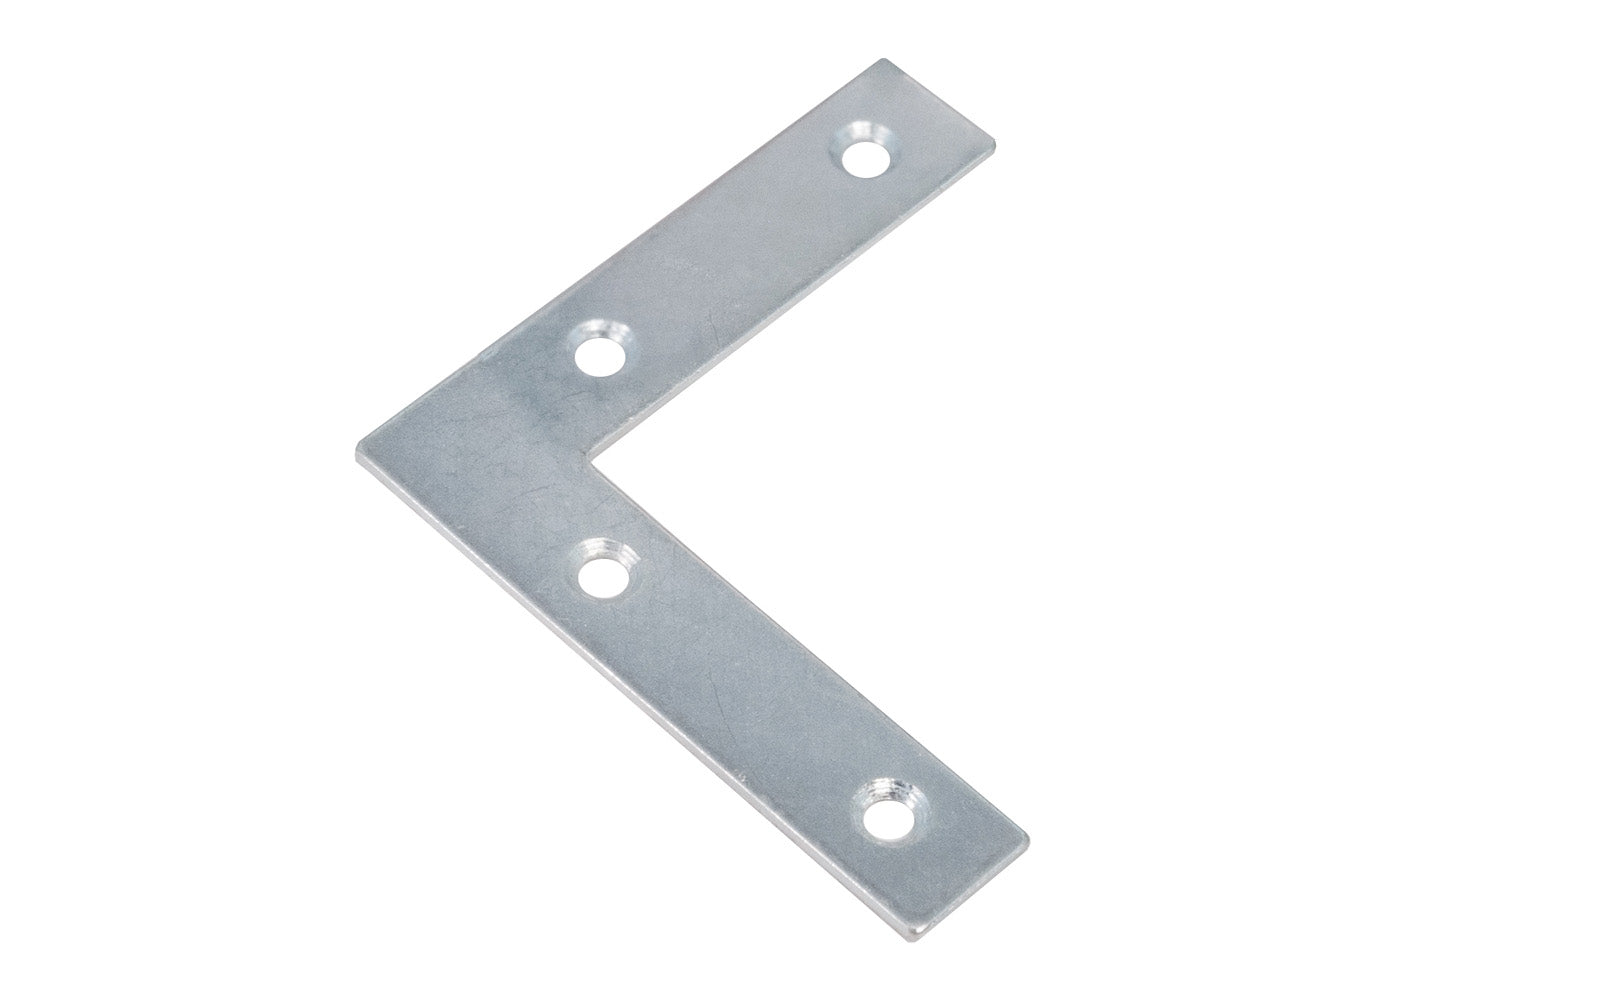 These flat corner irons are designed for furniture, cabinets, shelving support, etc. Allows for quick & easy repair of items in the workshop, home, & other applications. Made of steel material with a zinc plated finish. Countersunk holes. Sold as singles, or bulk box of (48) flat corner braces. 2